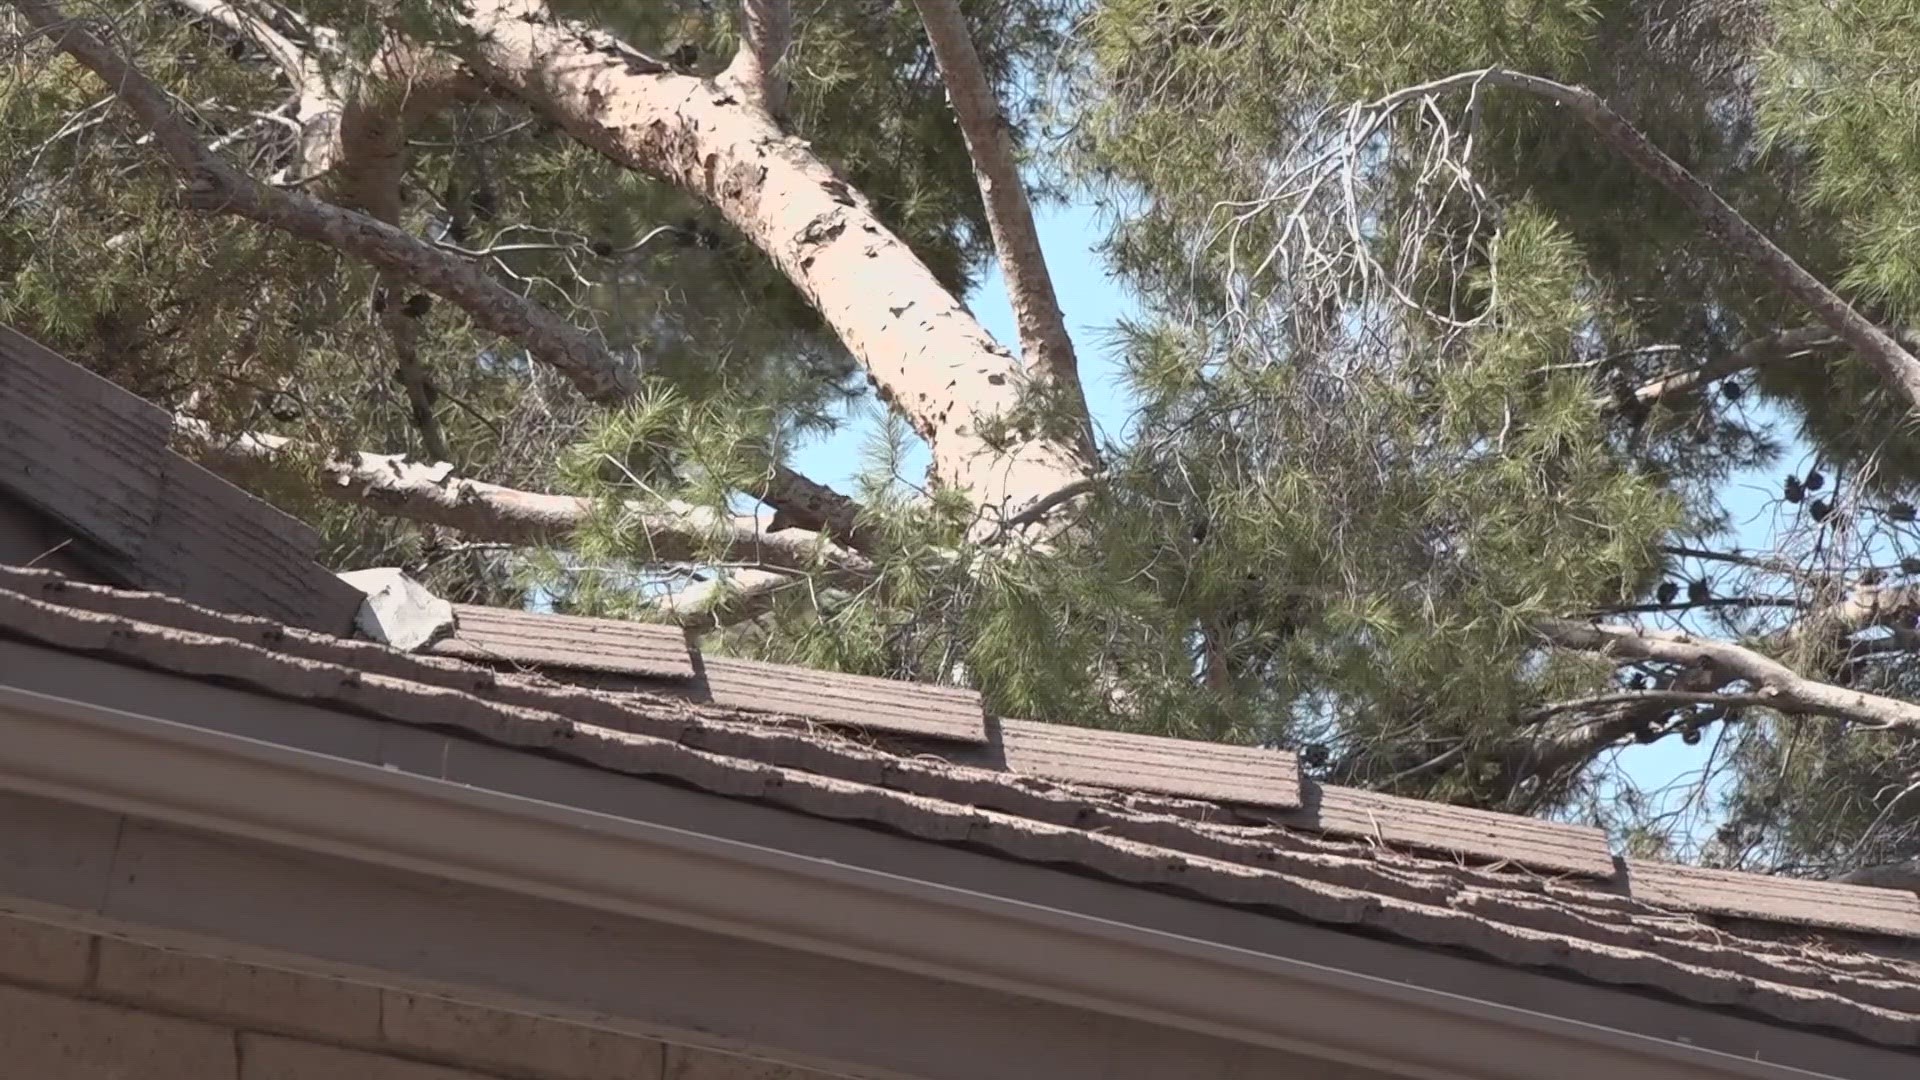 Several homes in Scottsdale suffered severe damage after strong winds knocked trees onto roofs.